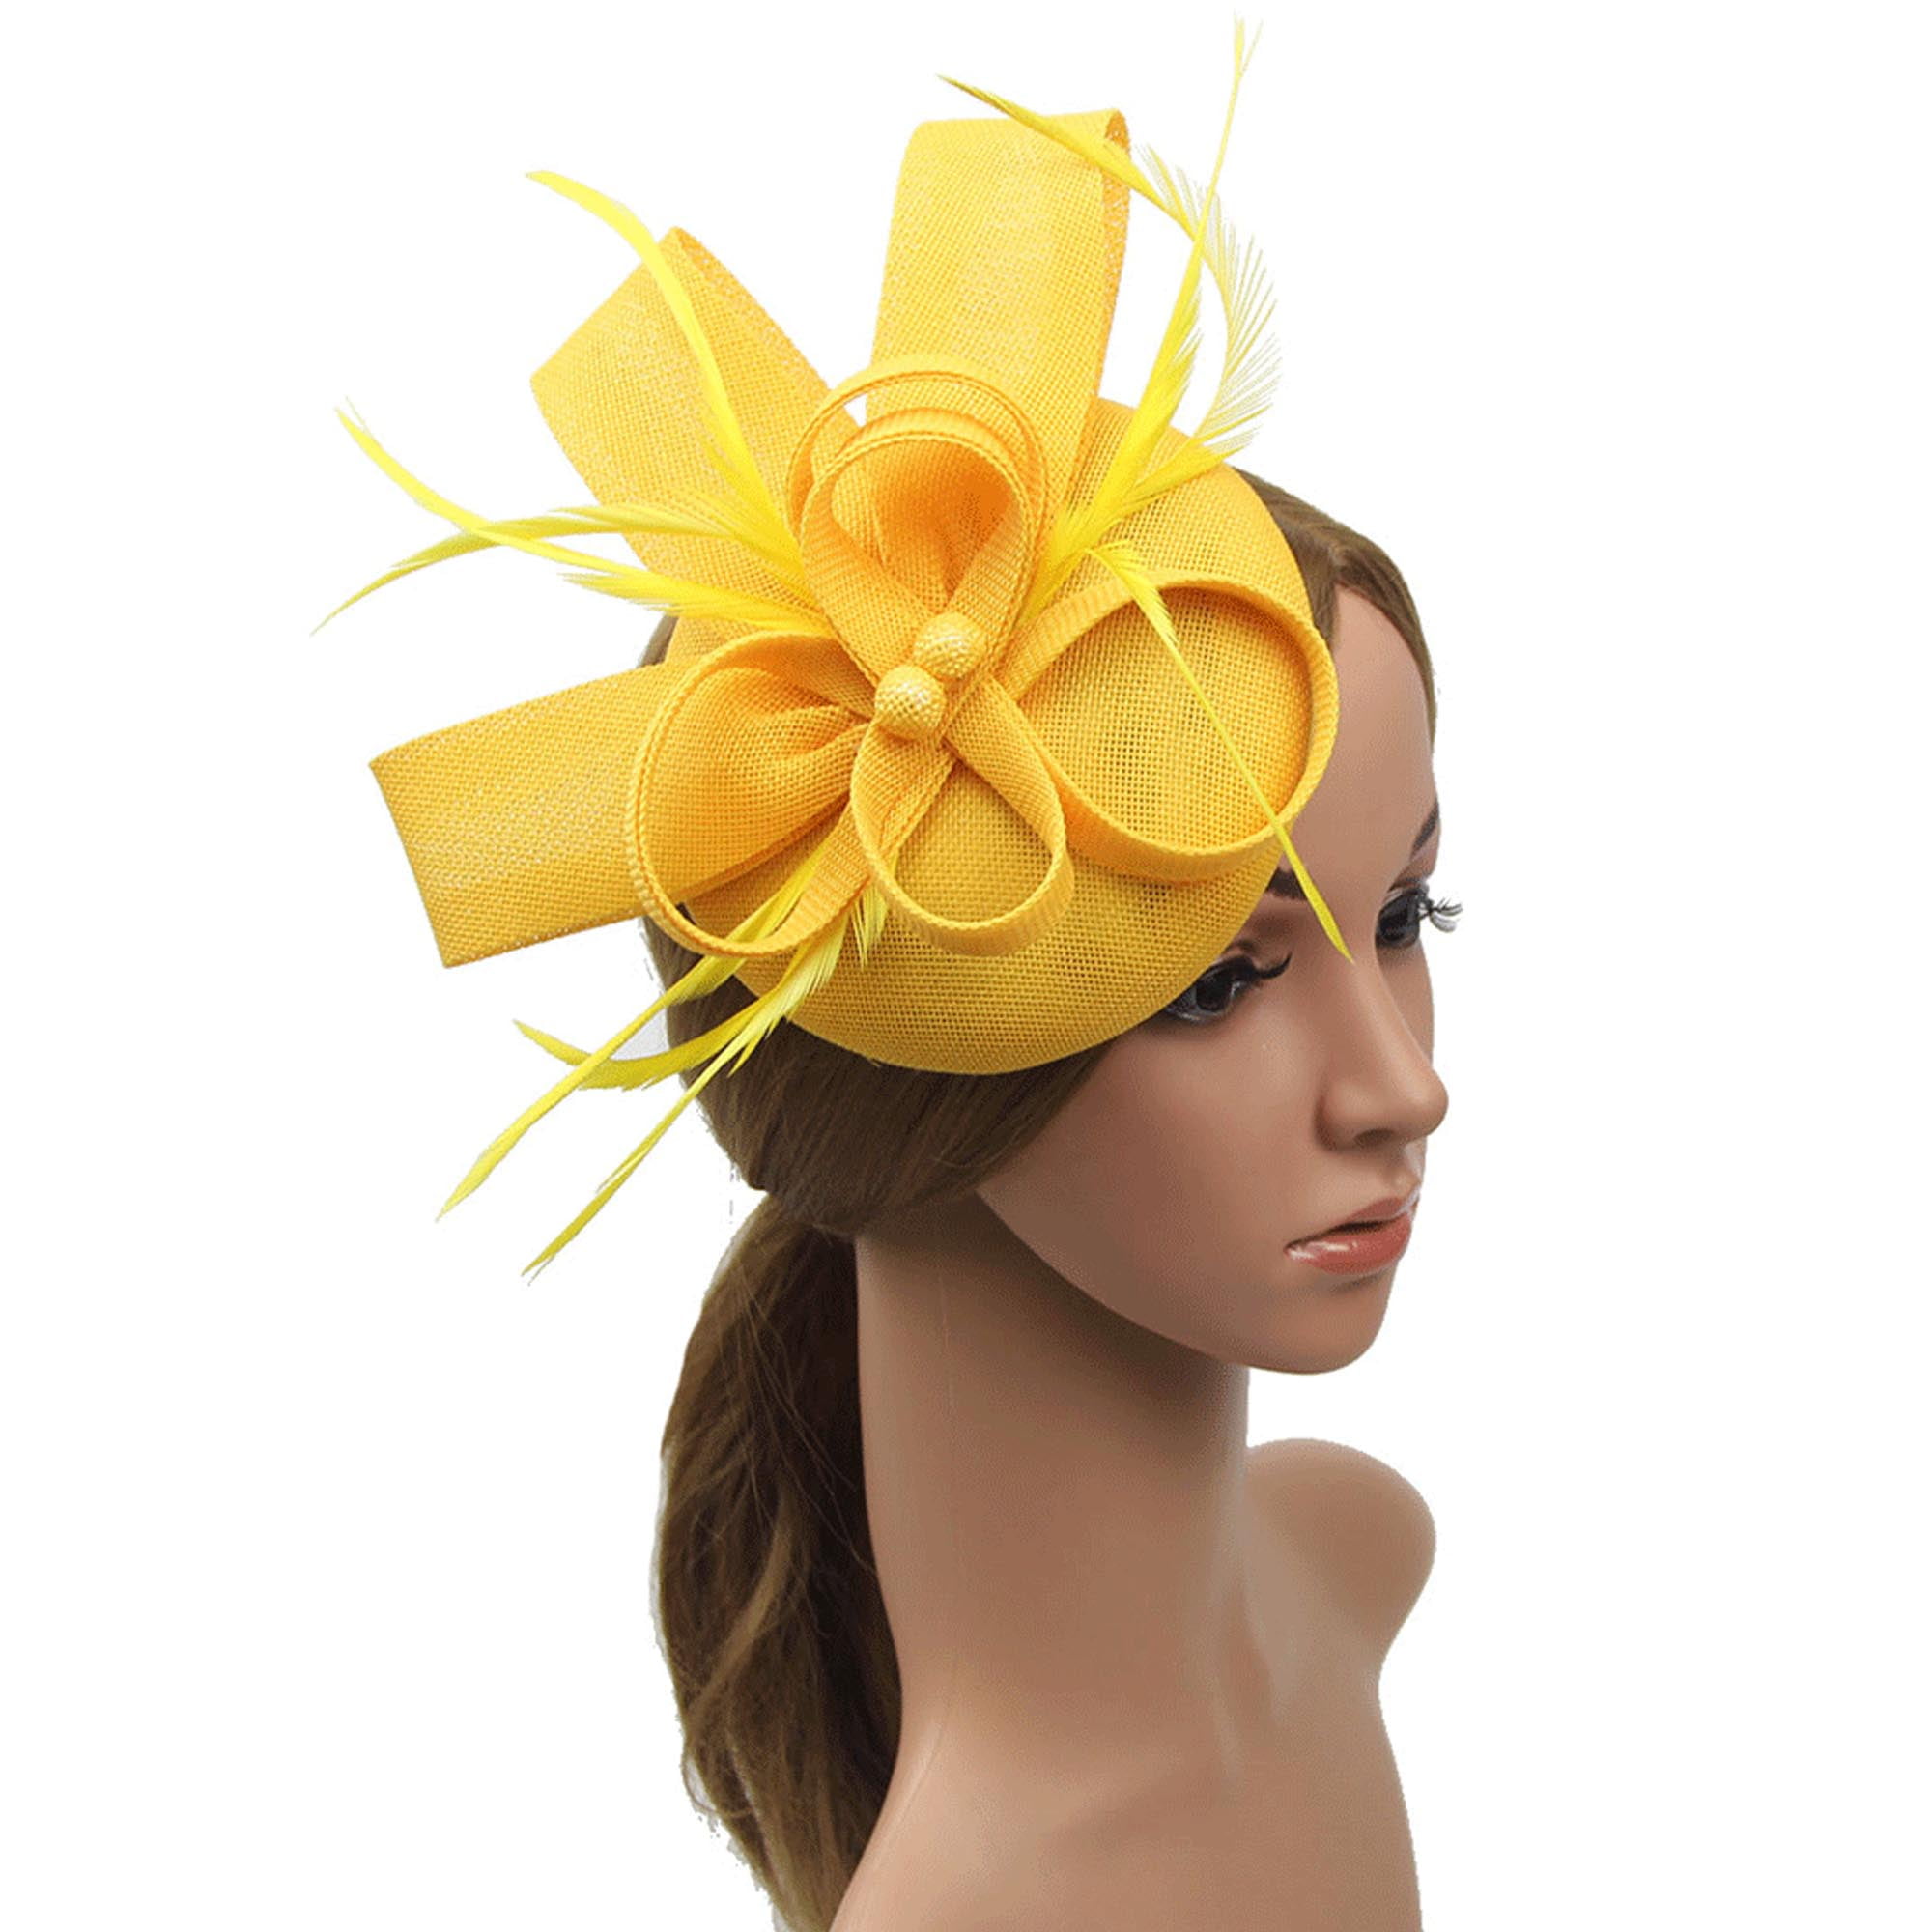 Flower Hair Clip Feathers Small Mini Top Hat Wedding Fascinator Royal Ascot Race 